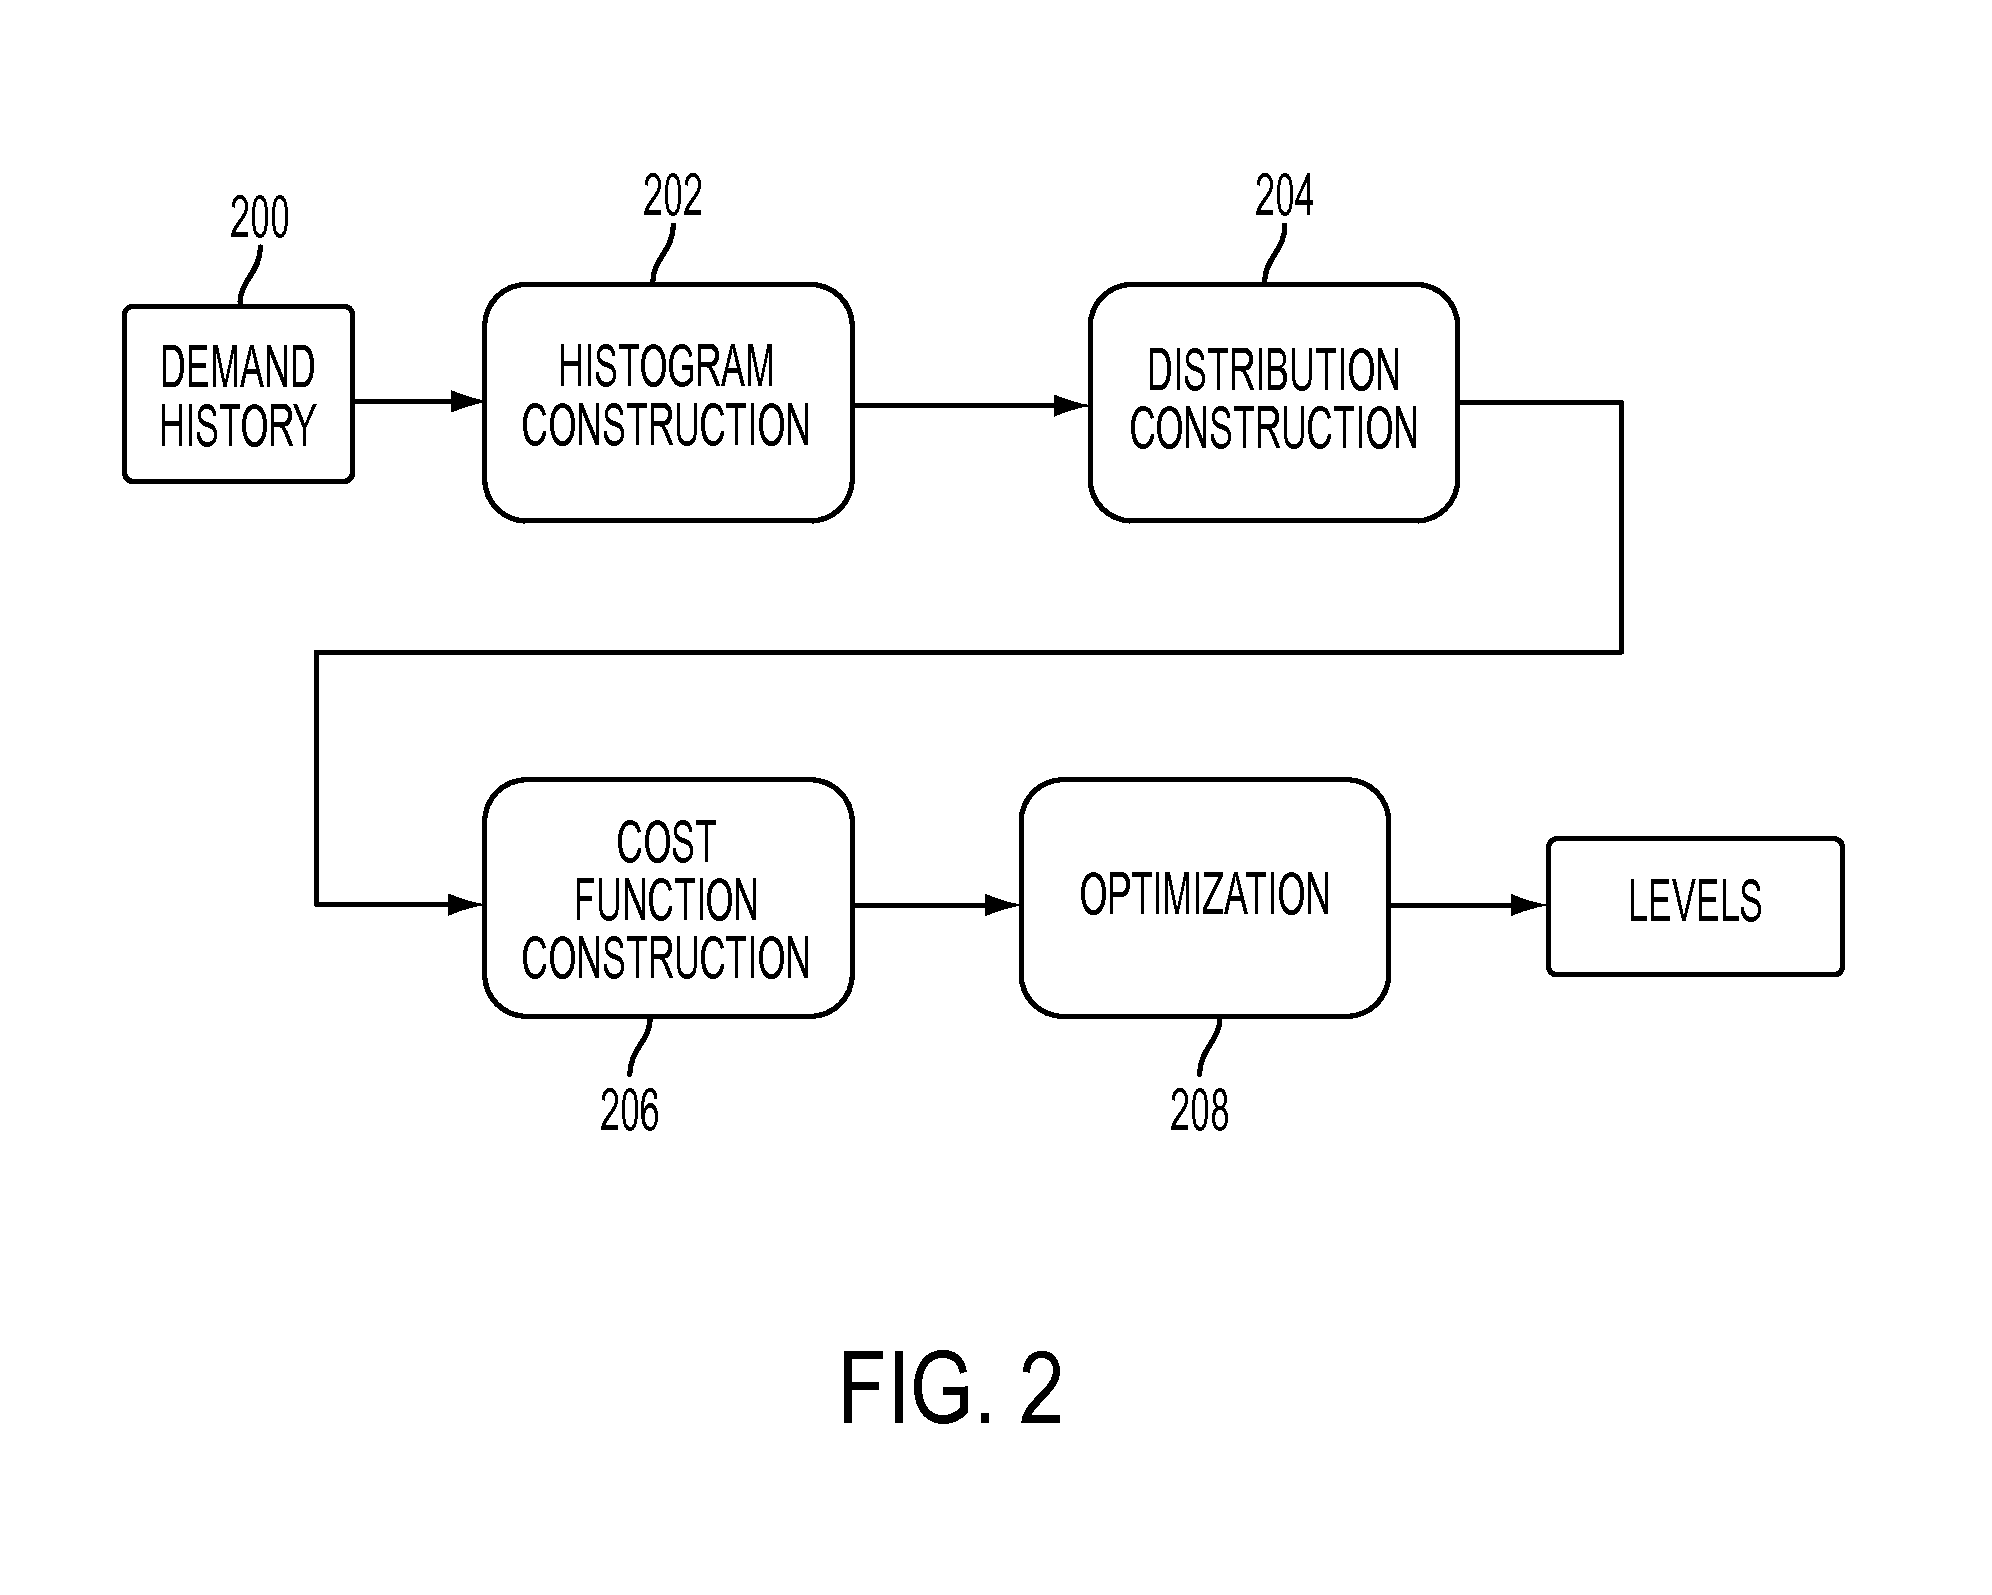 Method and computer system for setting inventory control levels from demand inter-arrival time, demand size statistics